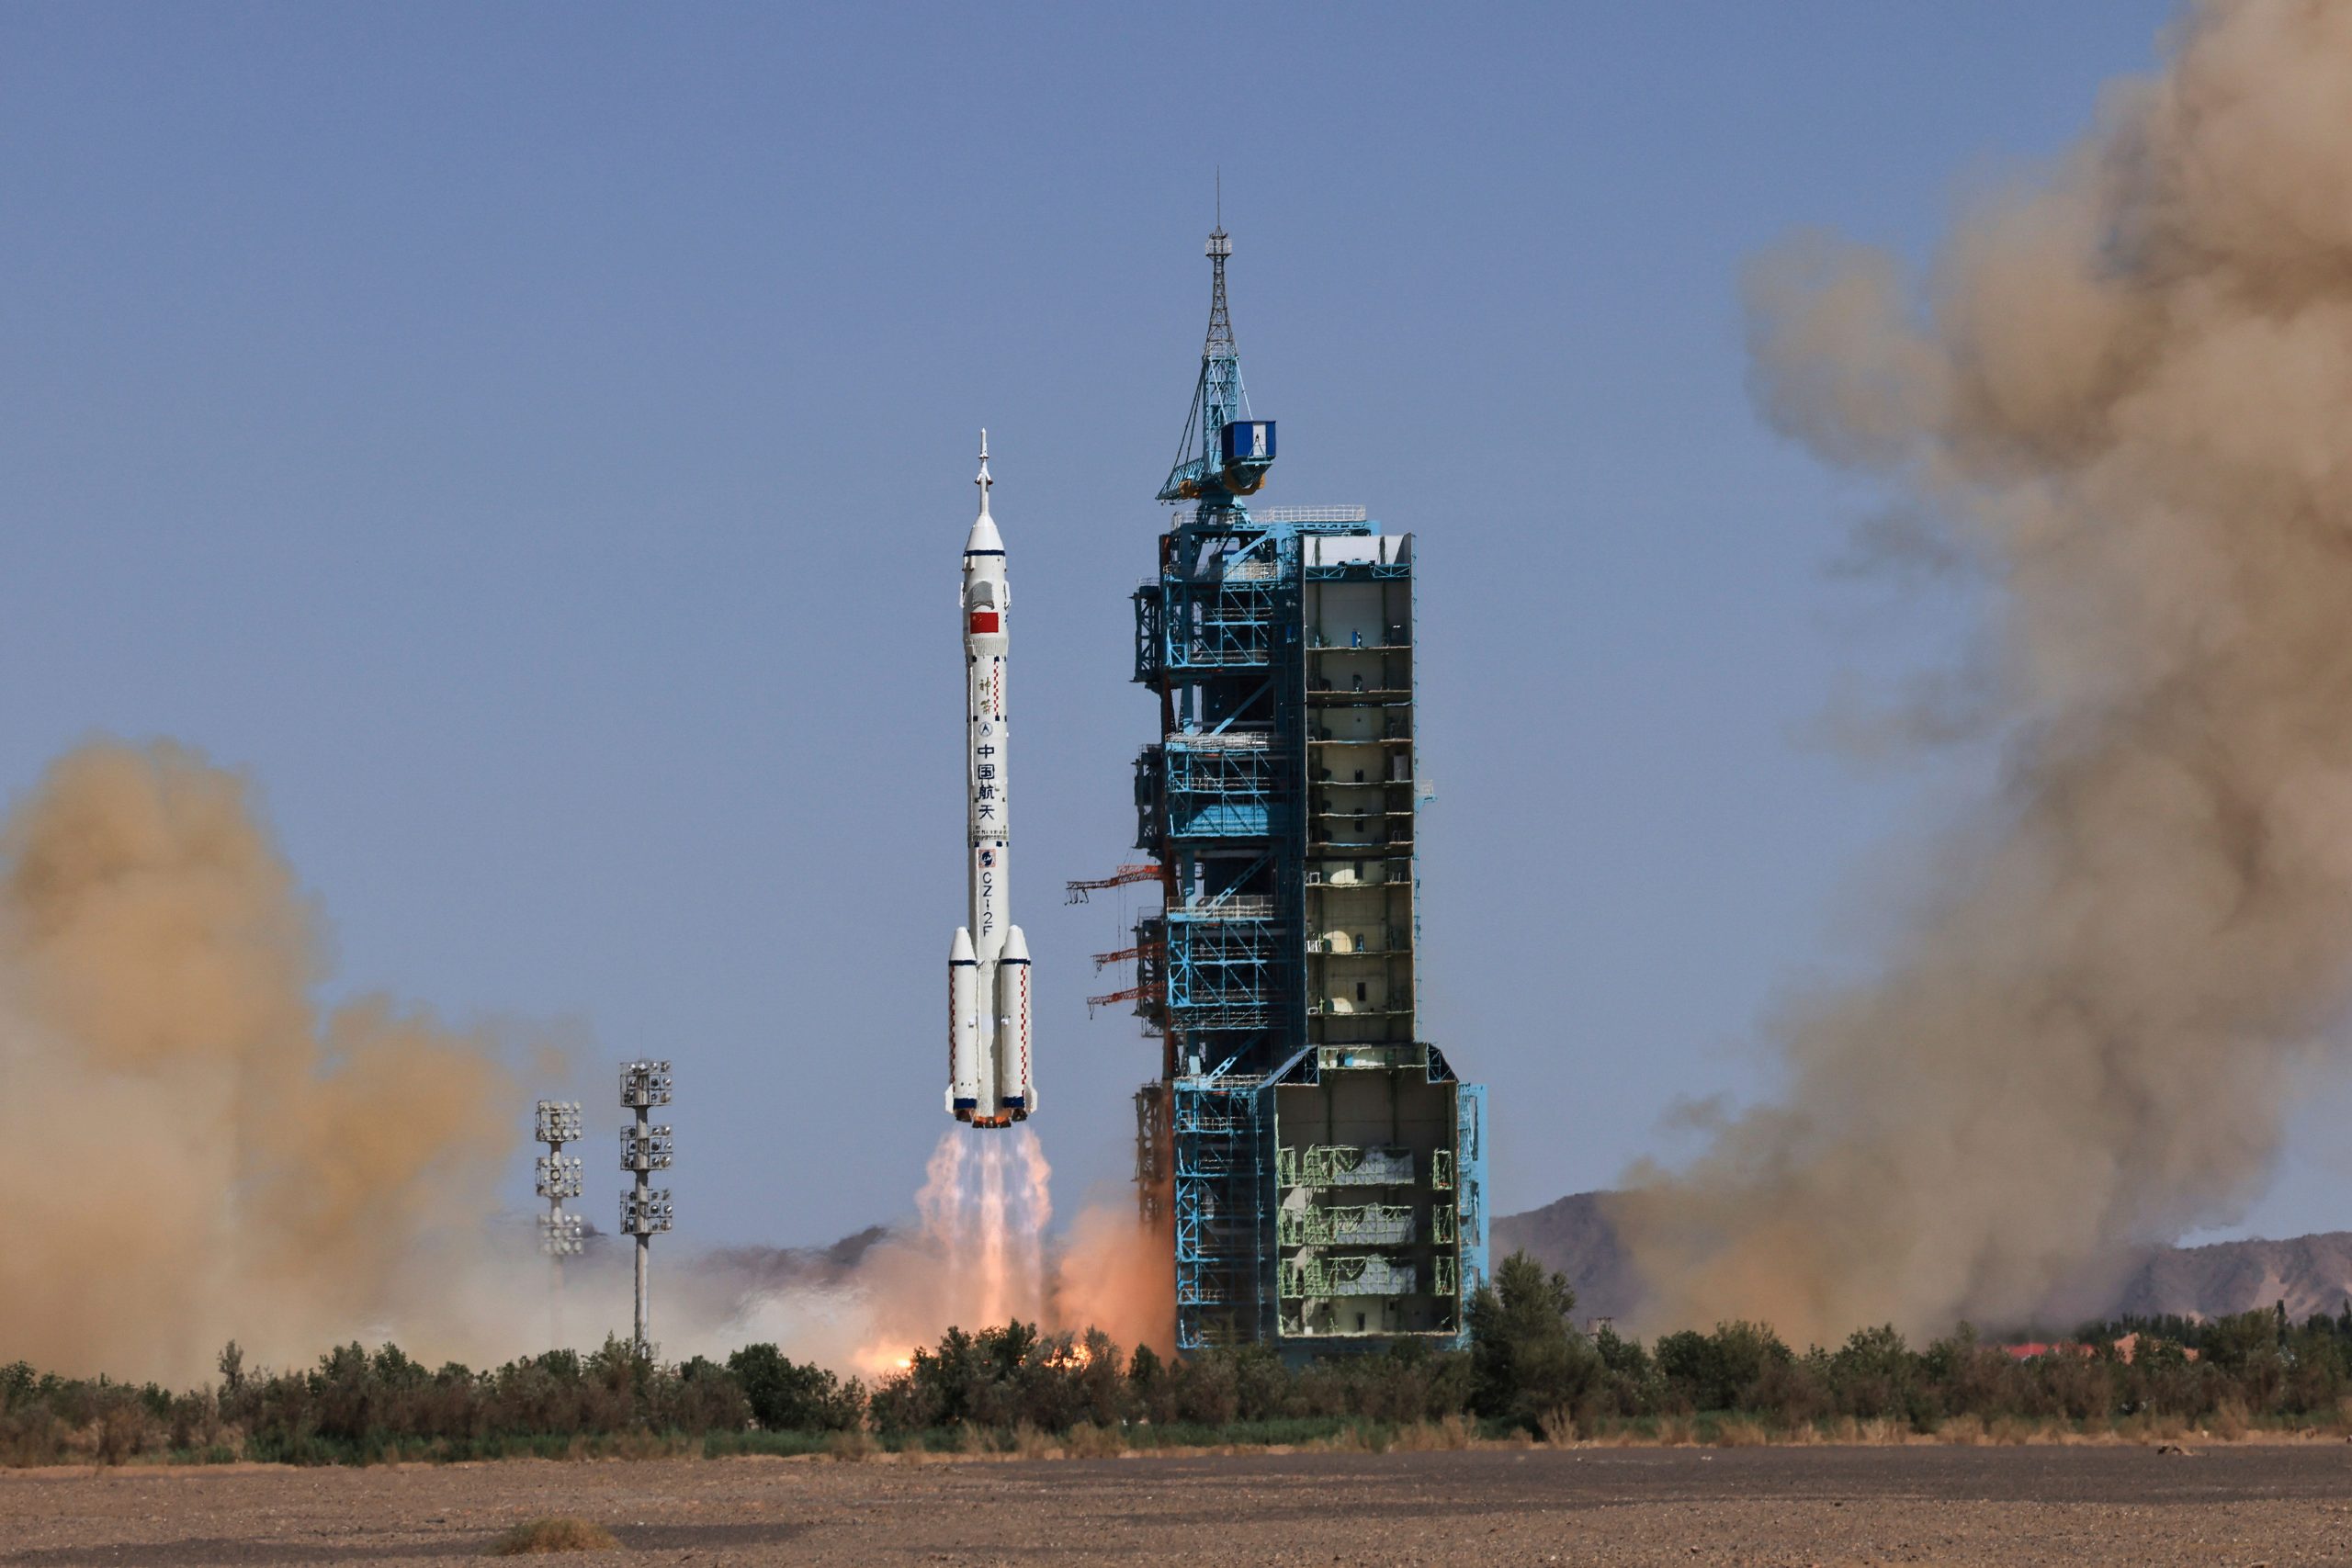 Chinese rocket falling to earth: Should you be worried about debris crash